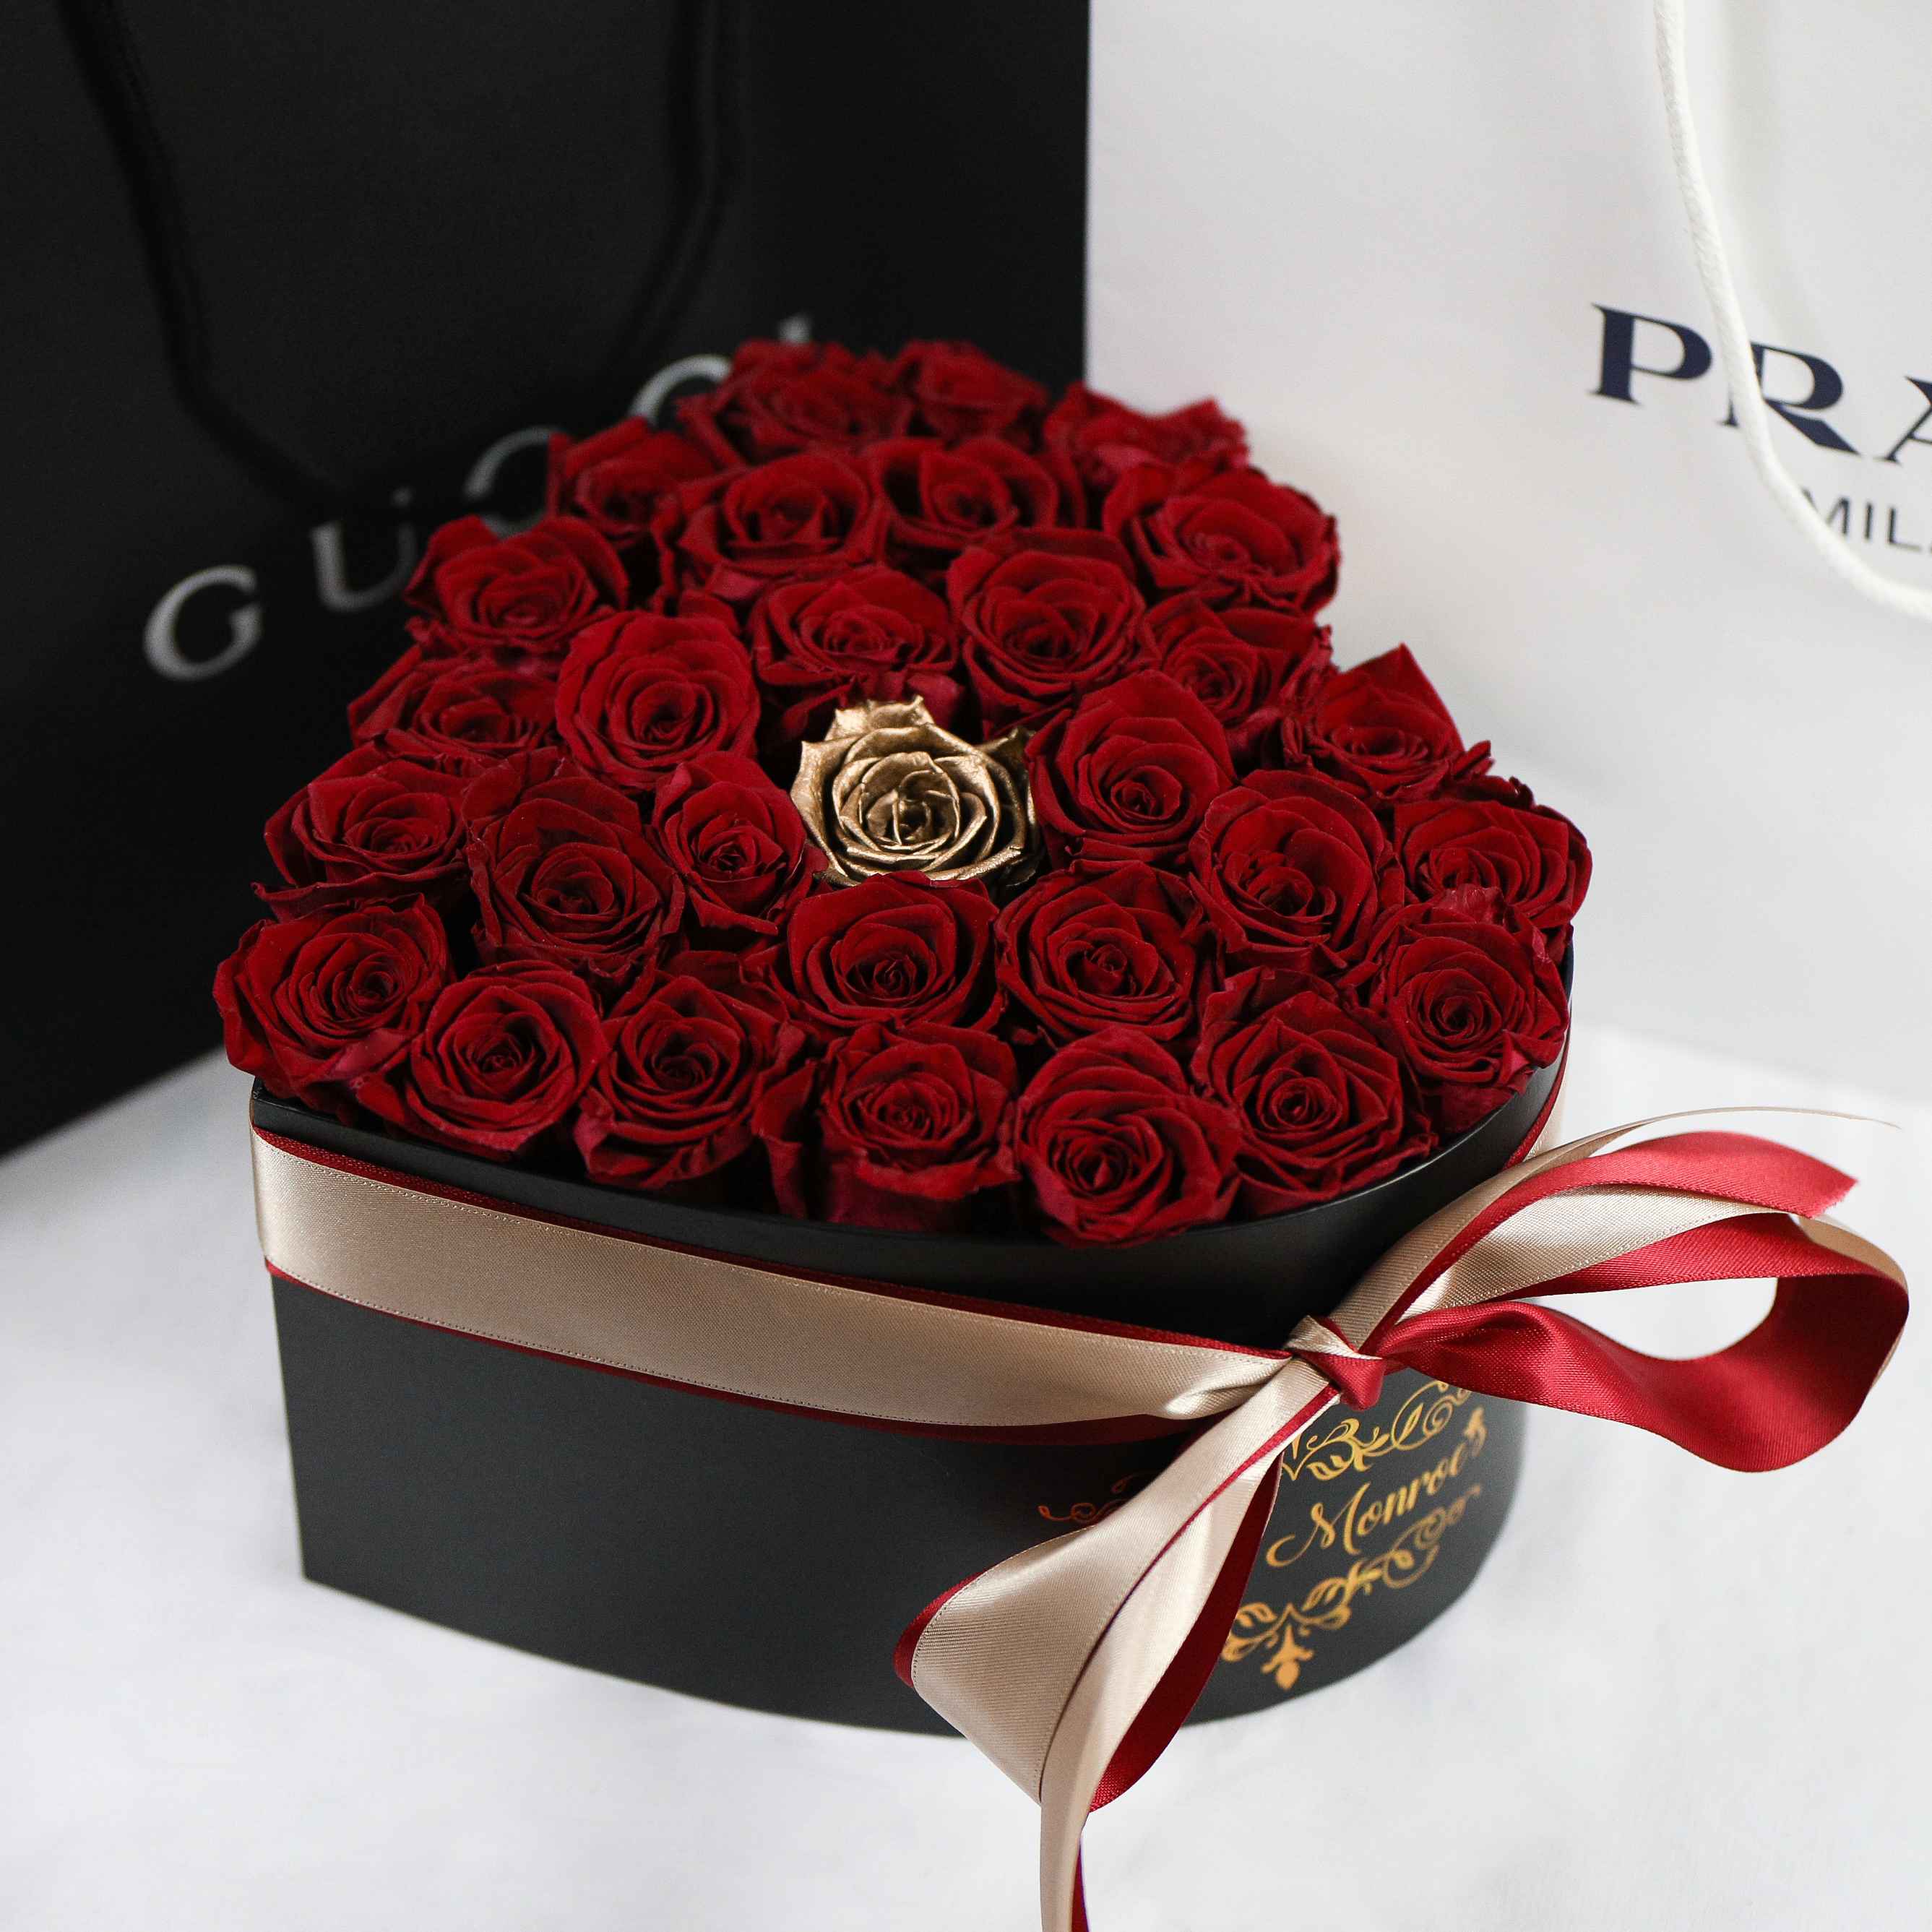 Red Roses with 1 Gold Rose - Heart Box Rose Bouquet - Medium (Black Box)